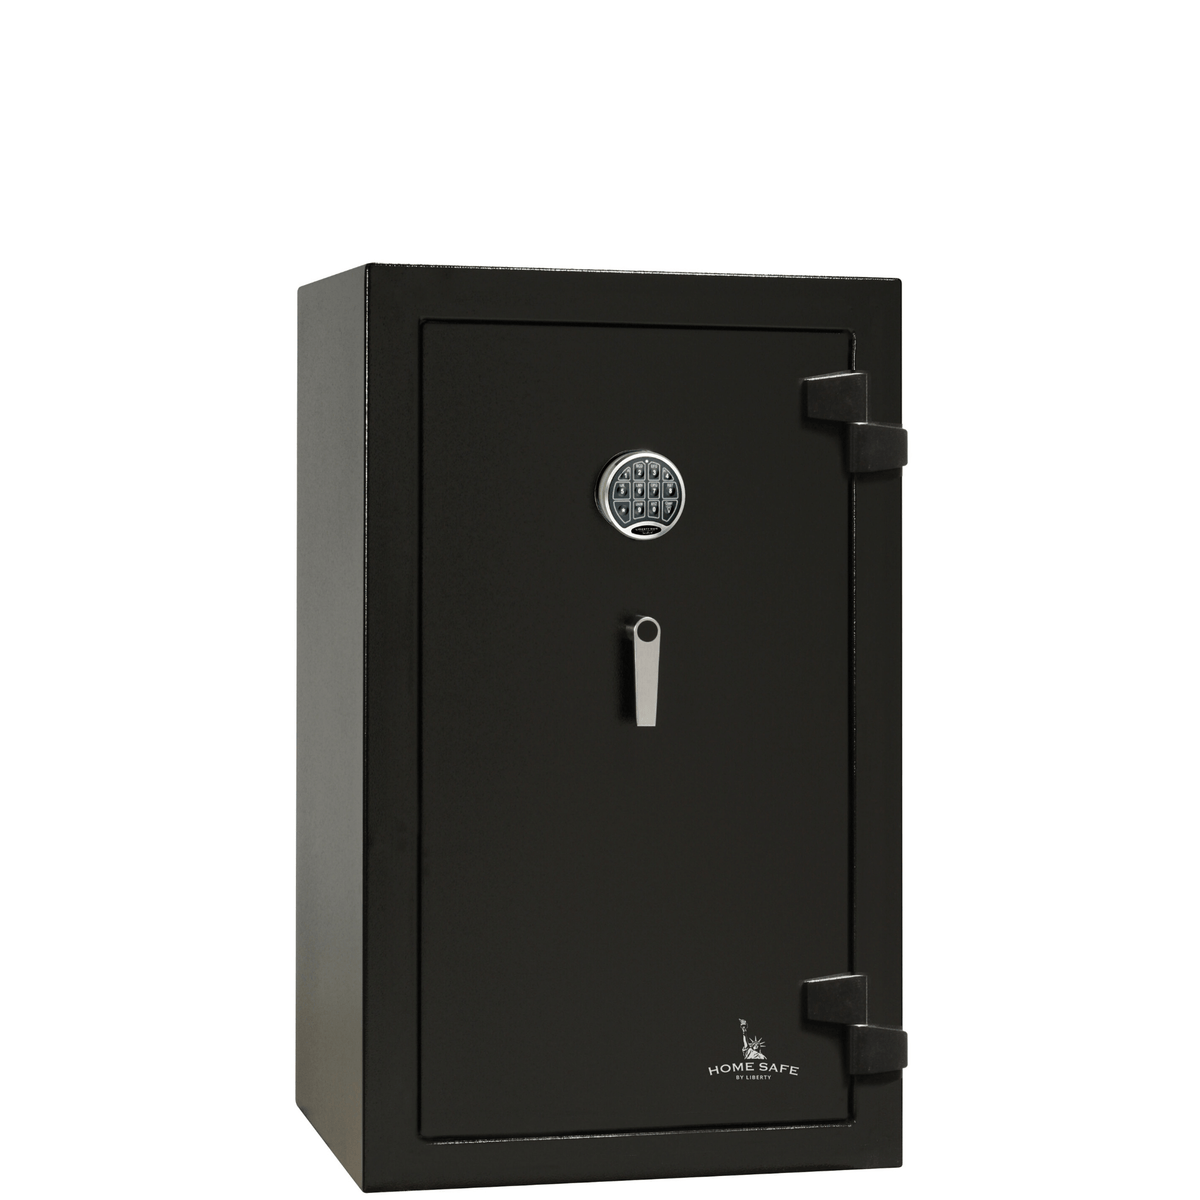 Home Safe Series | 60 Minute Fire Protection | 17 | Dimensions 59&quot;(H) x 24.25&quot;(W) x 22&quot;(D) | Black Textured | Electronic Lock